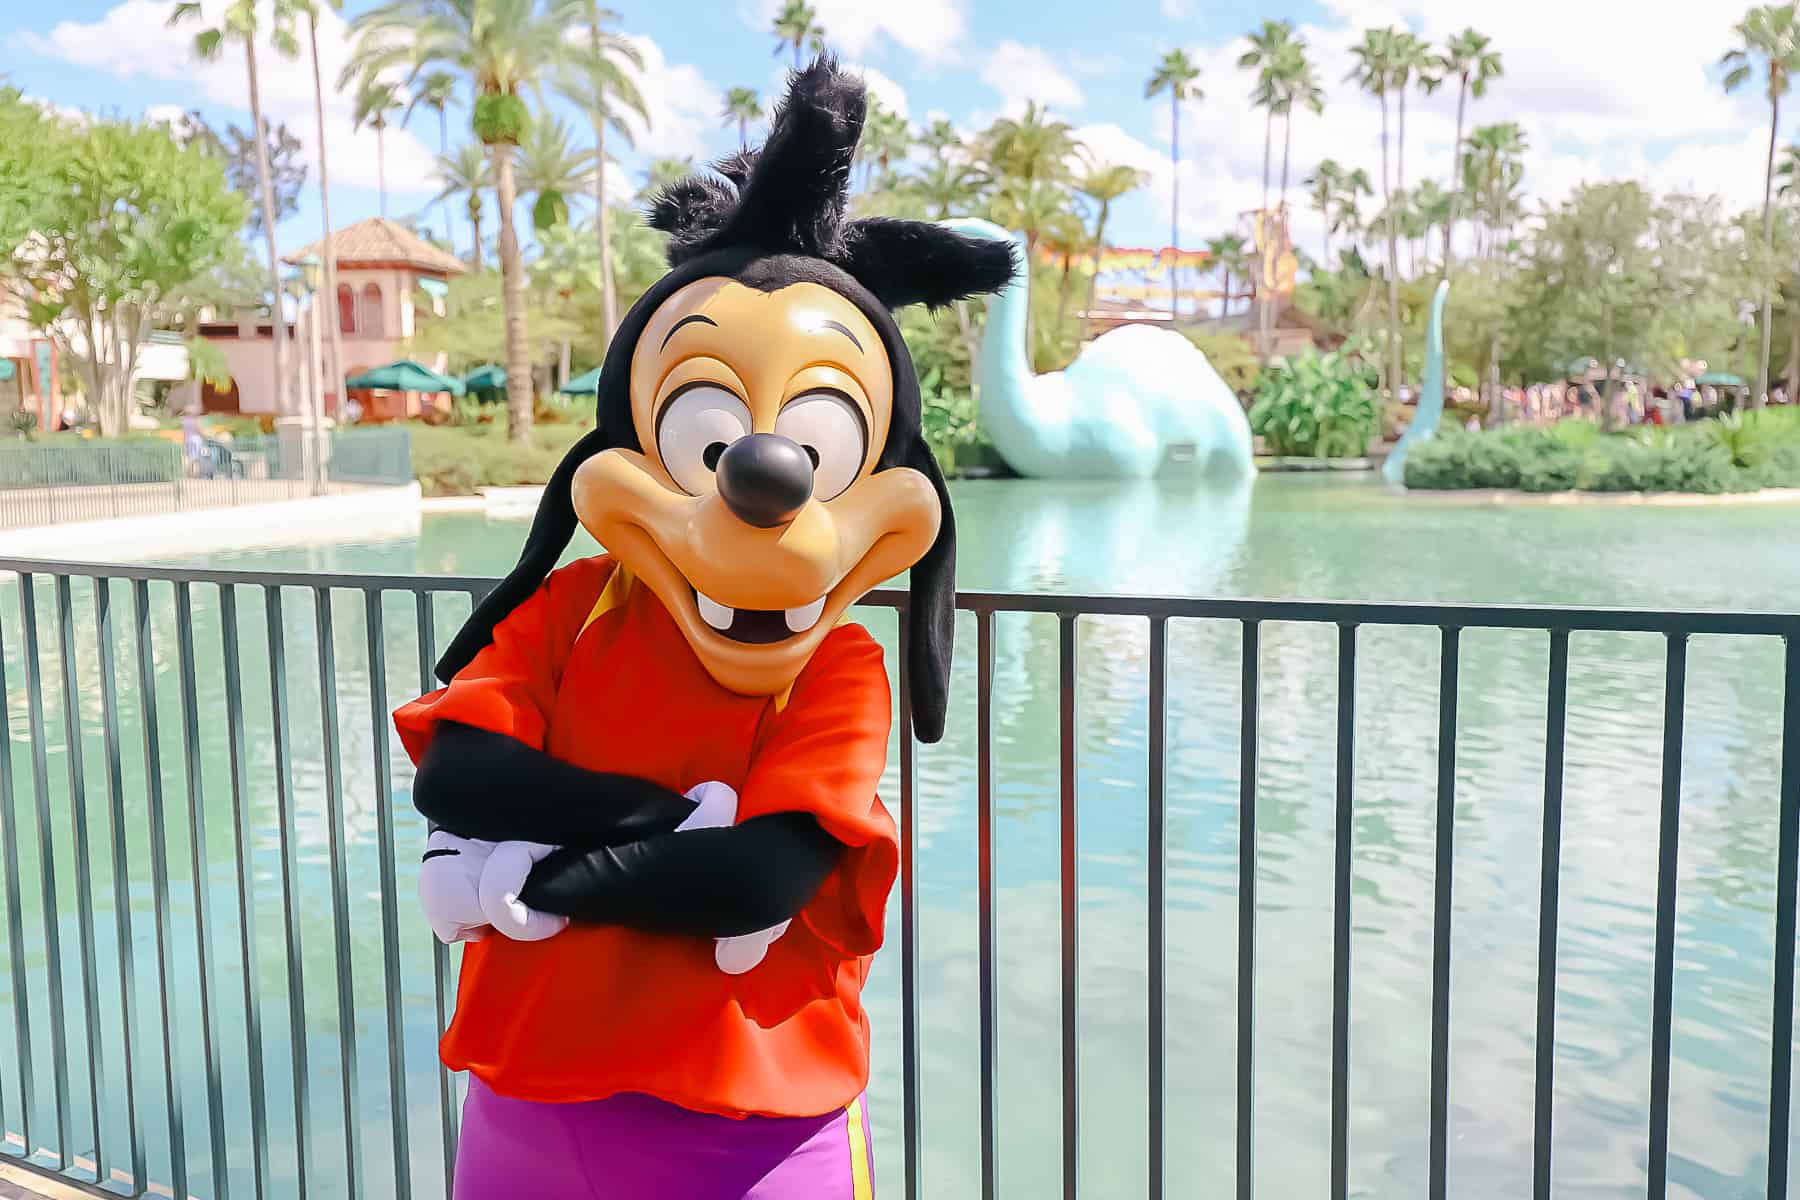 Meet Goofy and Max at Disney’s Hollywood Studios (Now Meeting Separately)